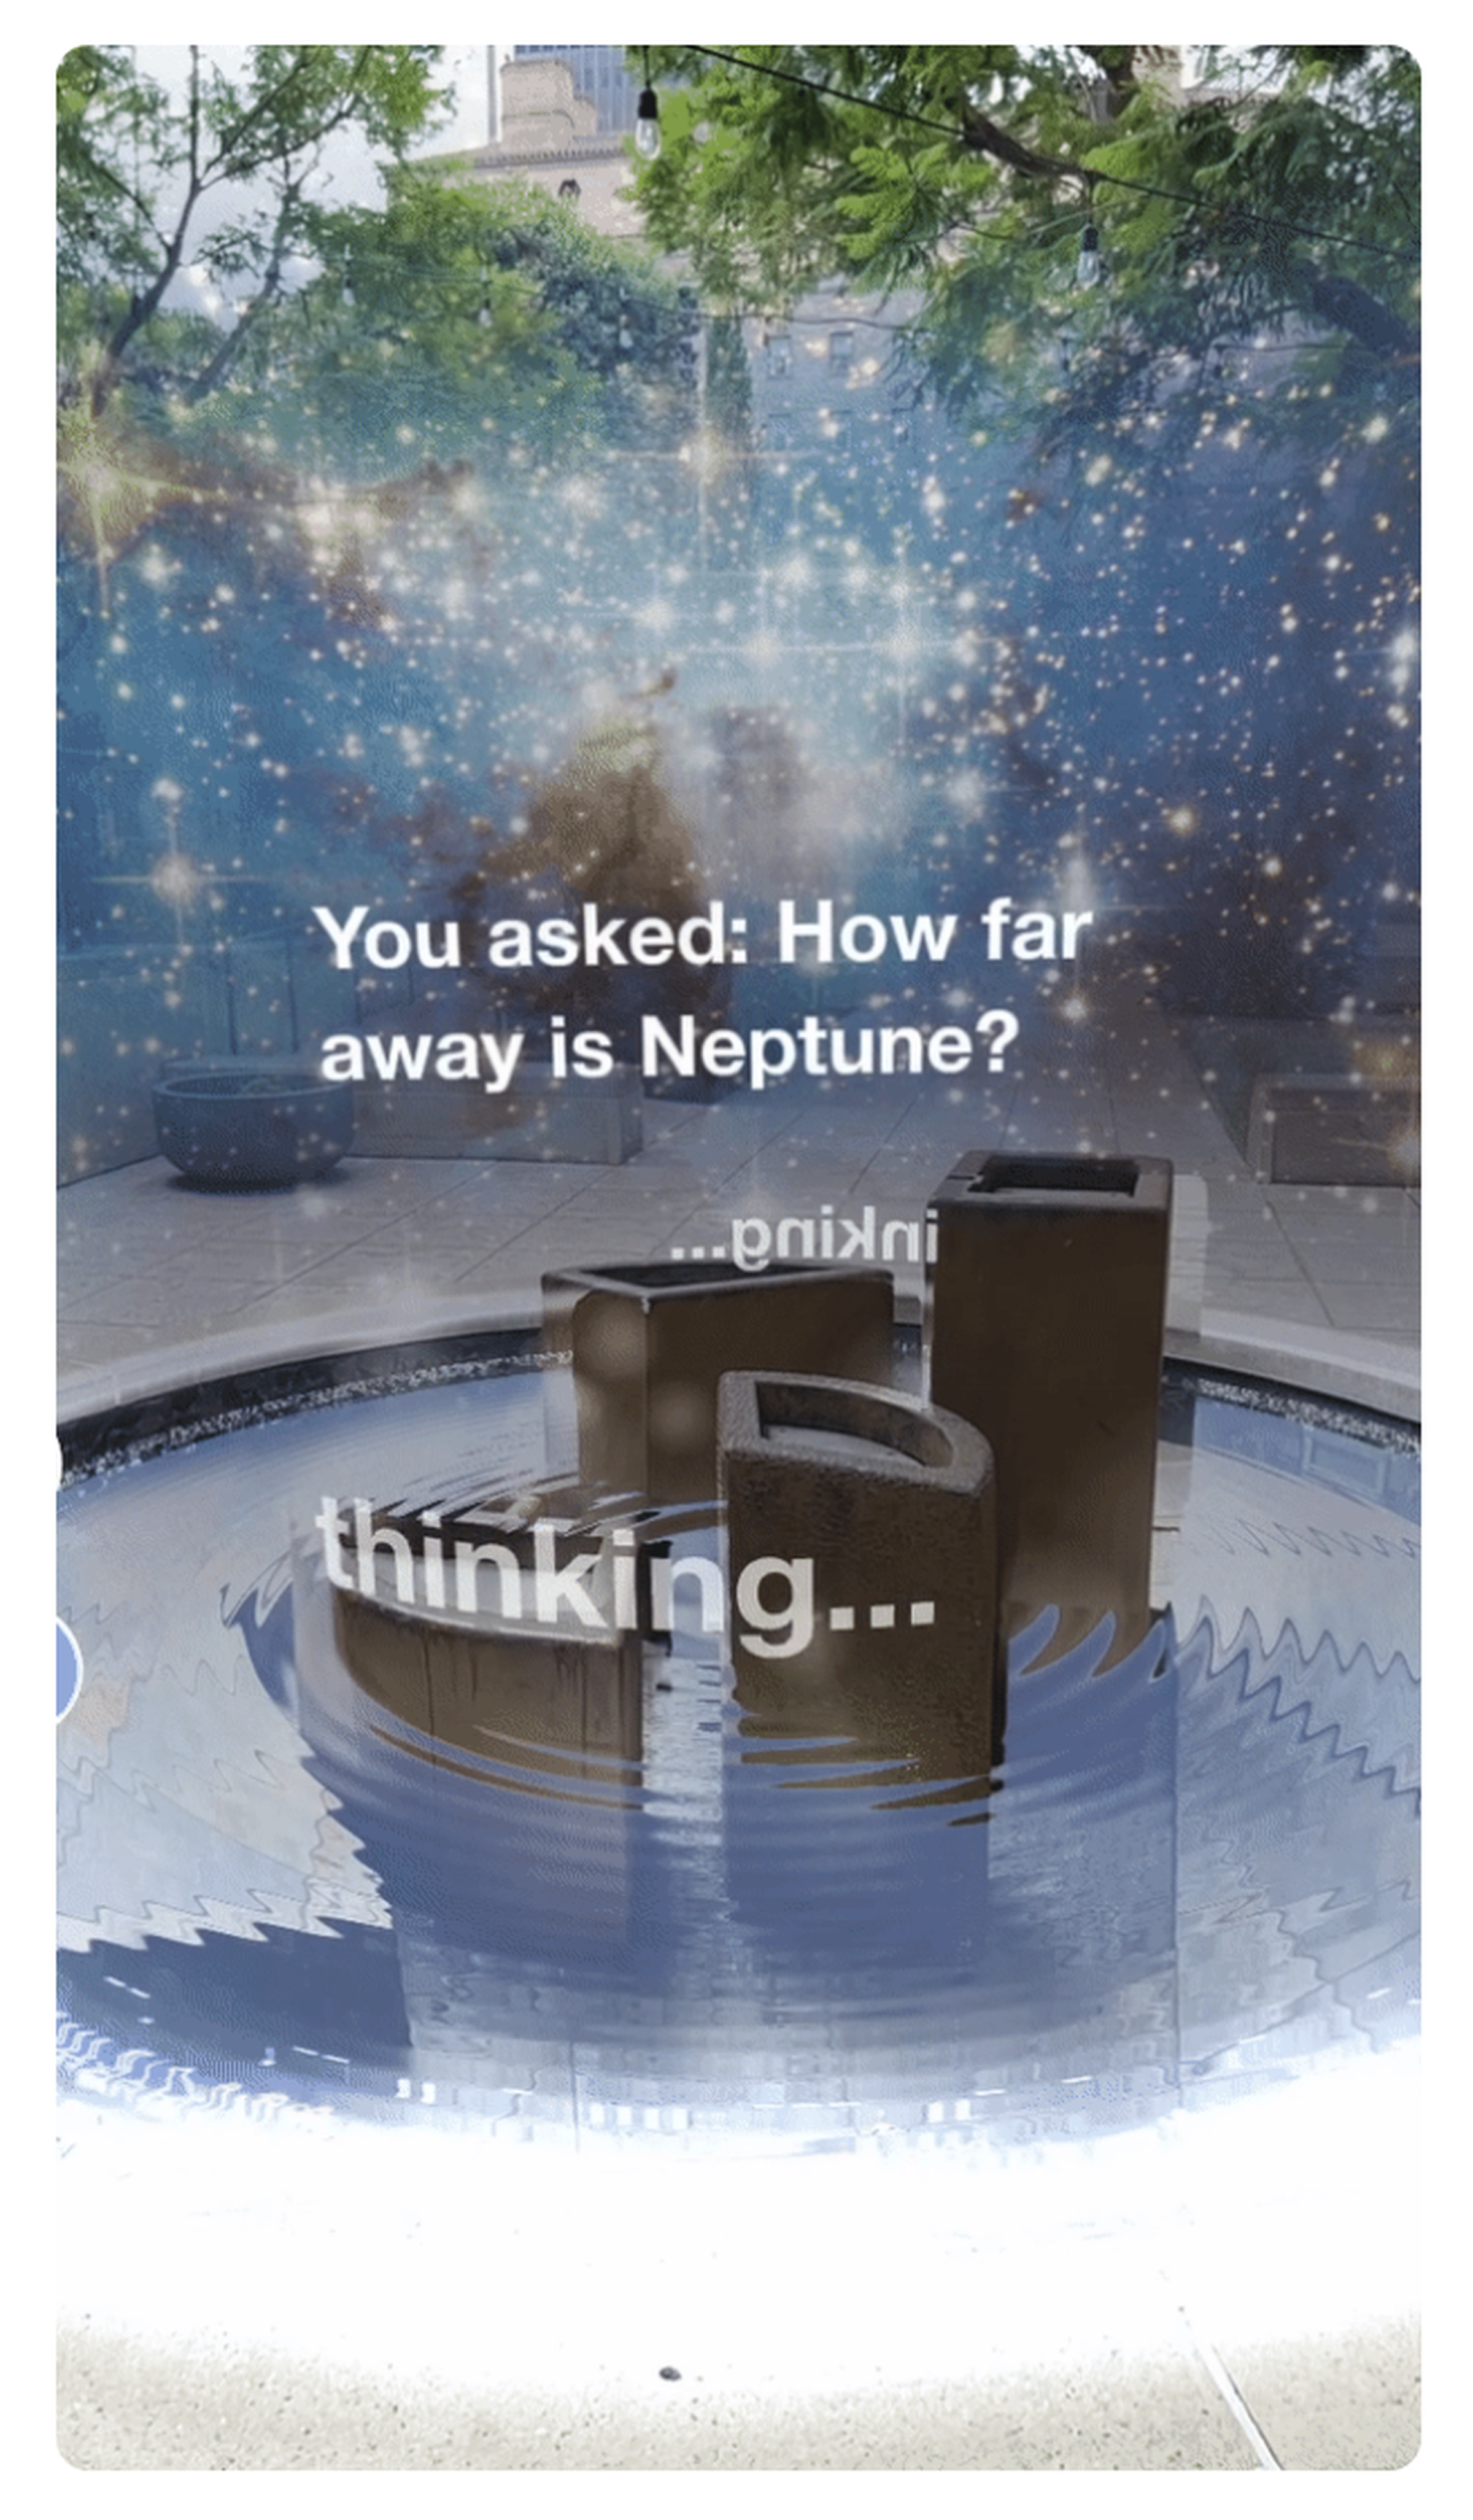 A Snapchat lens featuring ChatGPT-powered question and answer format.